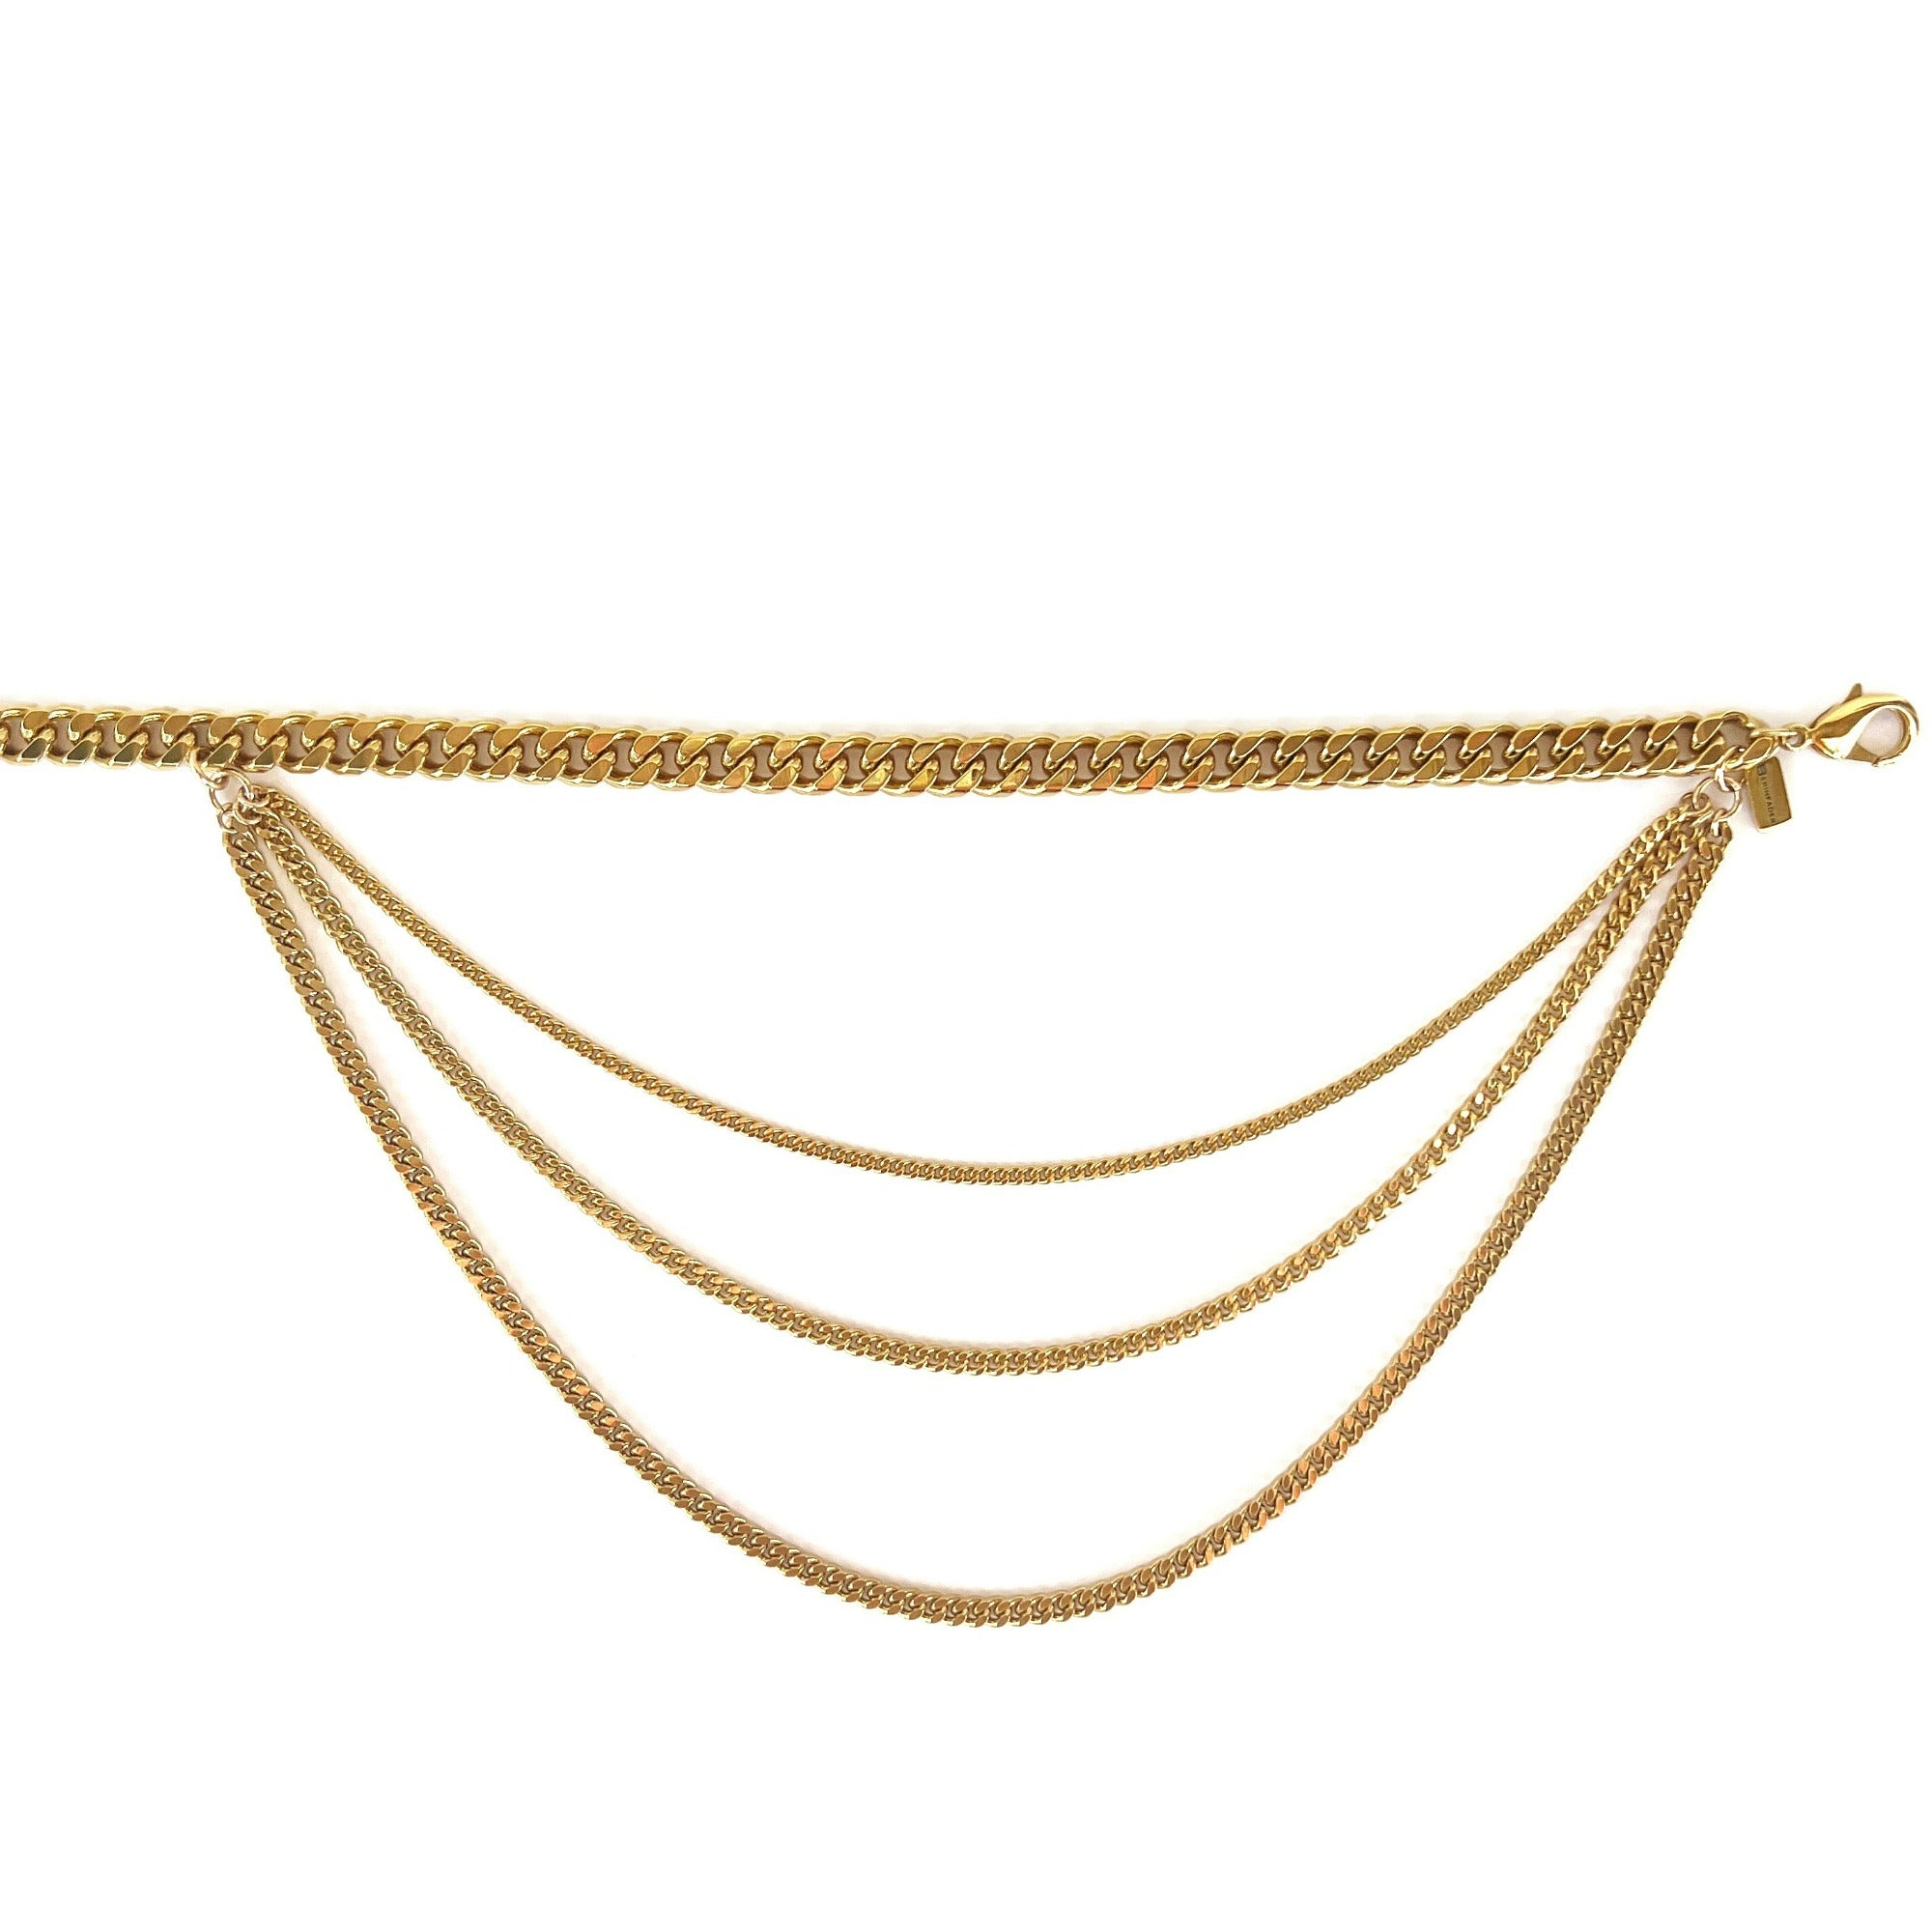 The Fader Belt by Erin Fader Jewelry